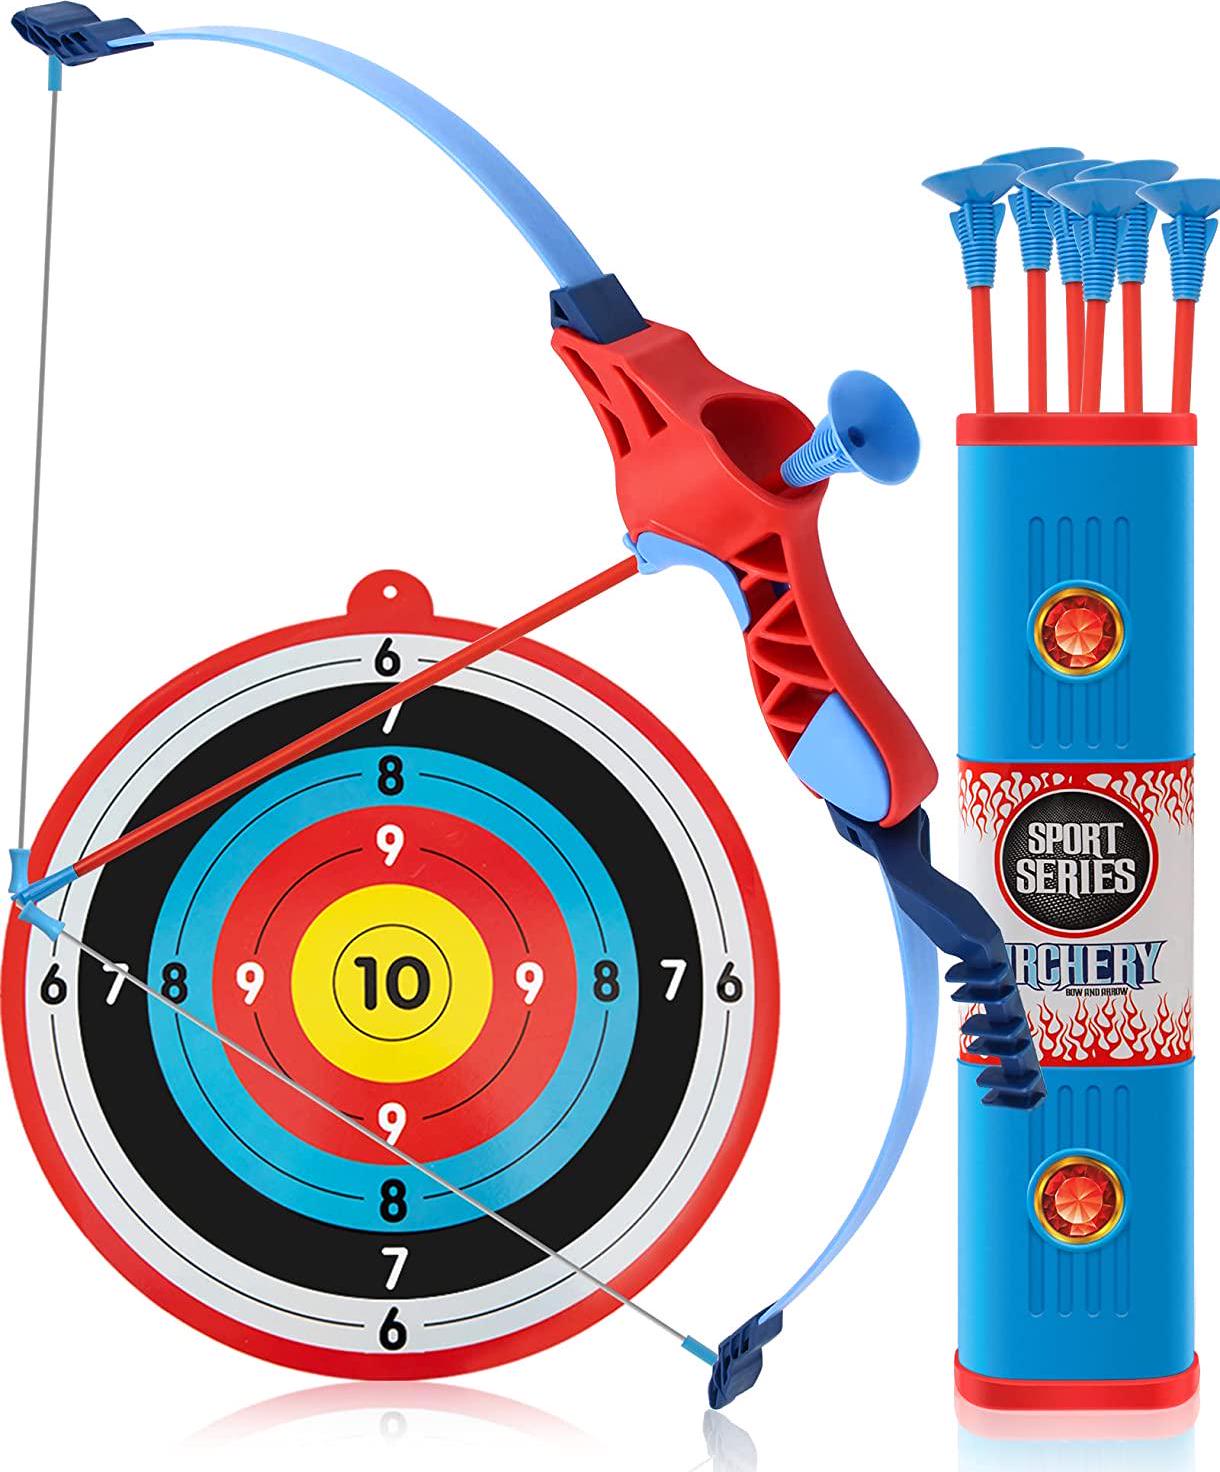 Liberry, liberry Bow and Arrow Archery Toy Set for Kids Boy Aged 6 -12, Include 6 Suction Cups Arrows, Target, and Bow, Great Indoor and Outdoor Toys Gift for Child